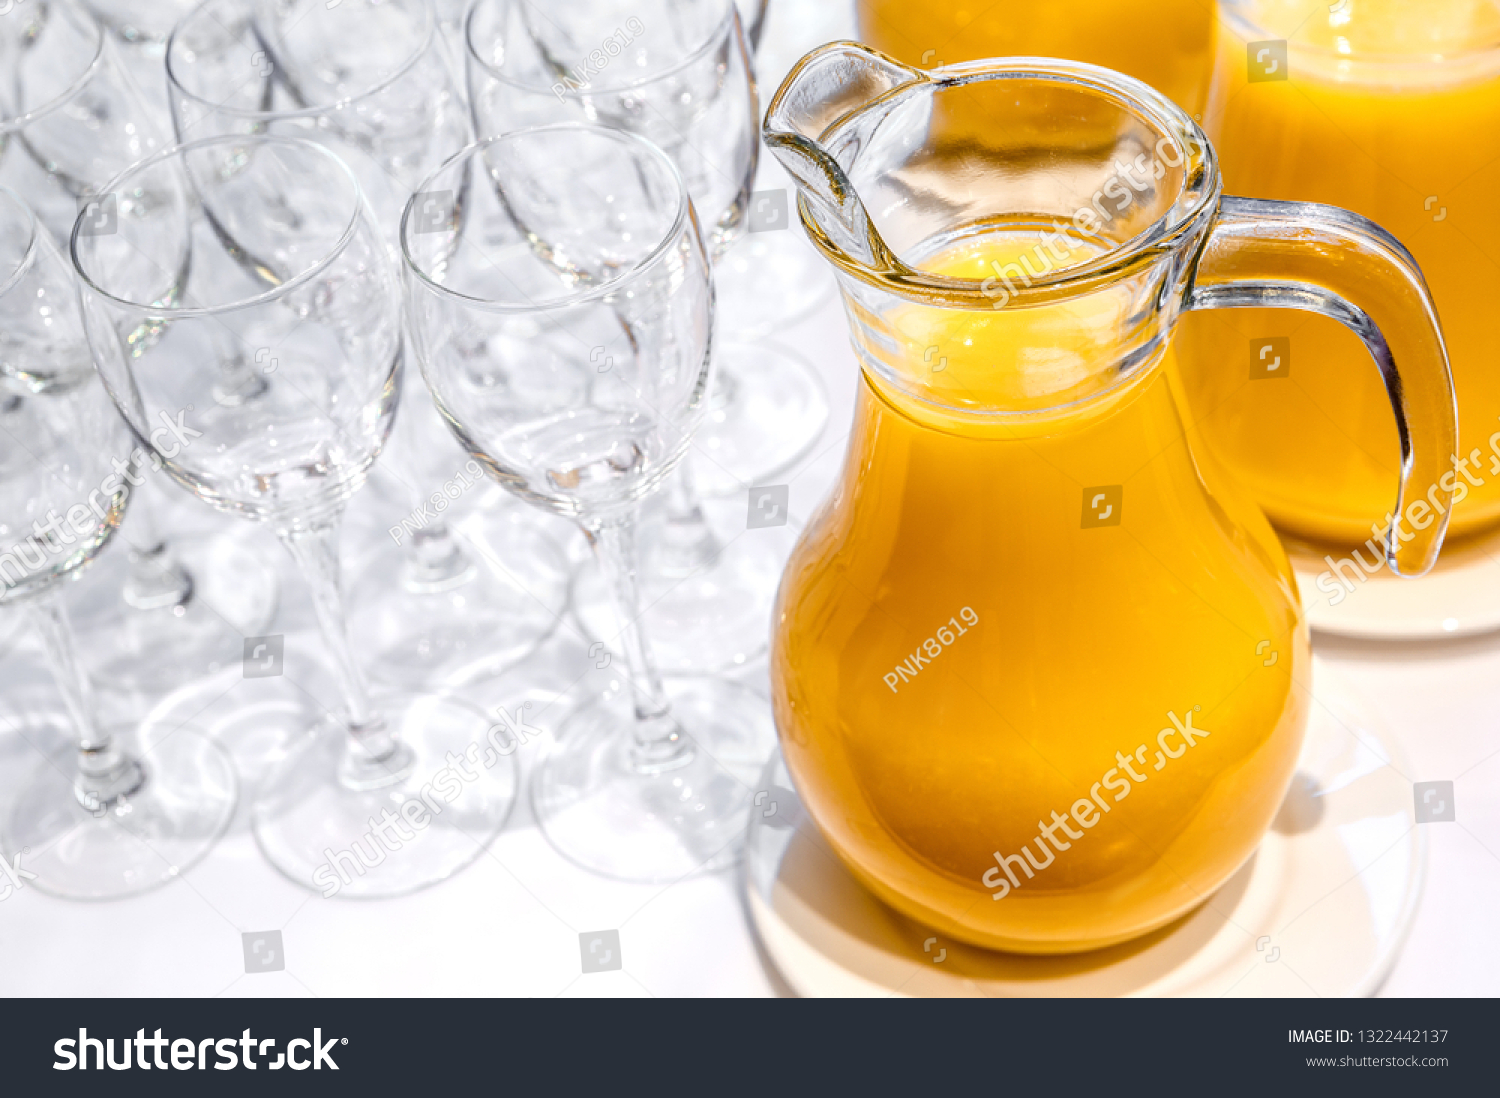 Jugs with freshly squeezed orange juice and clean transparent glasses #1322442137